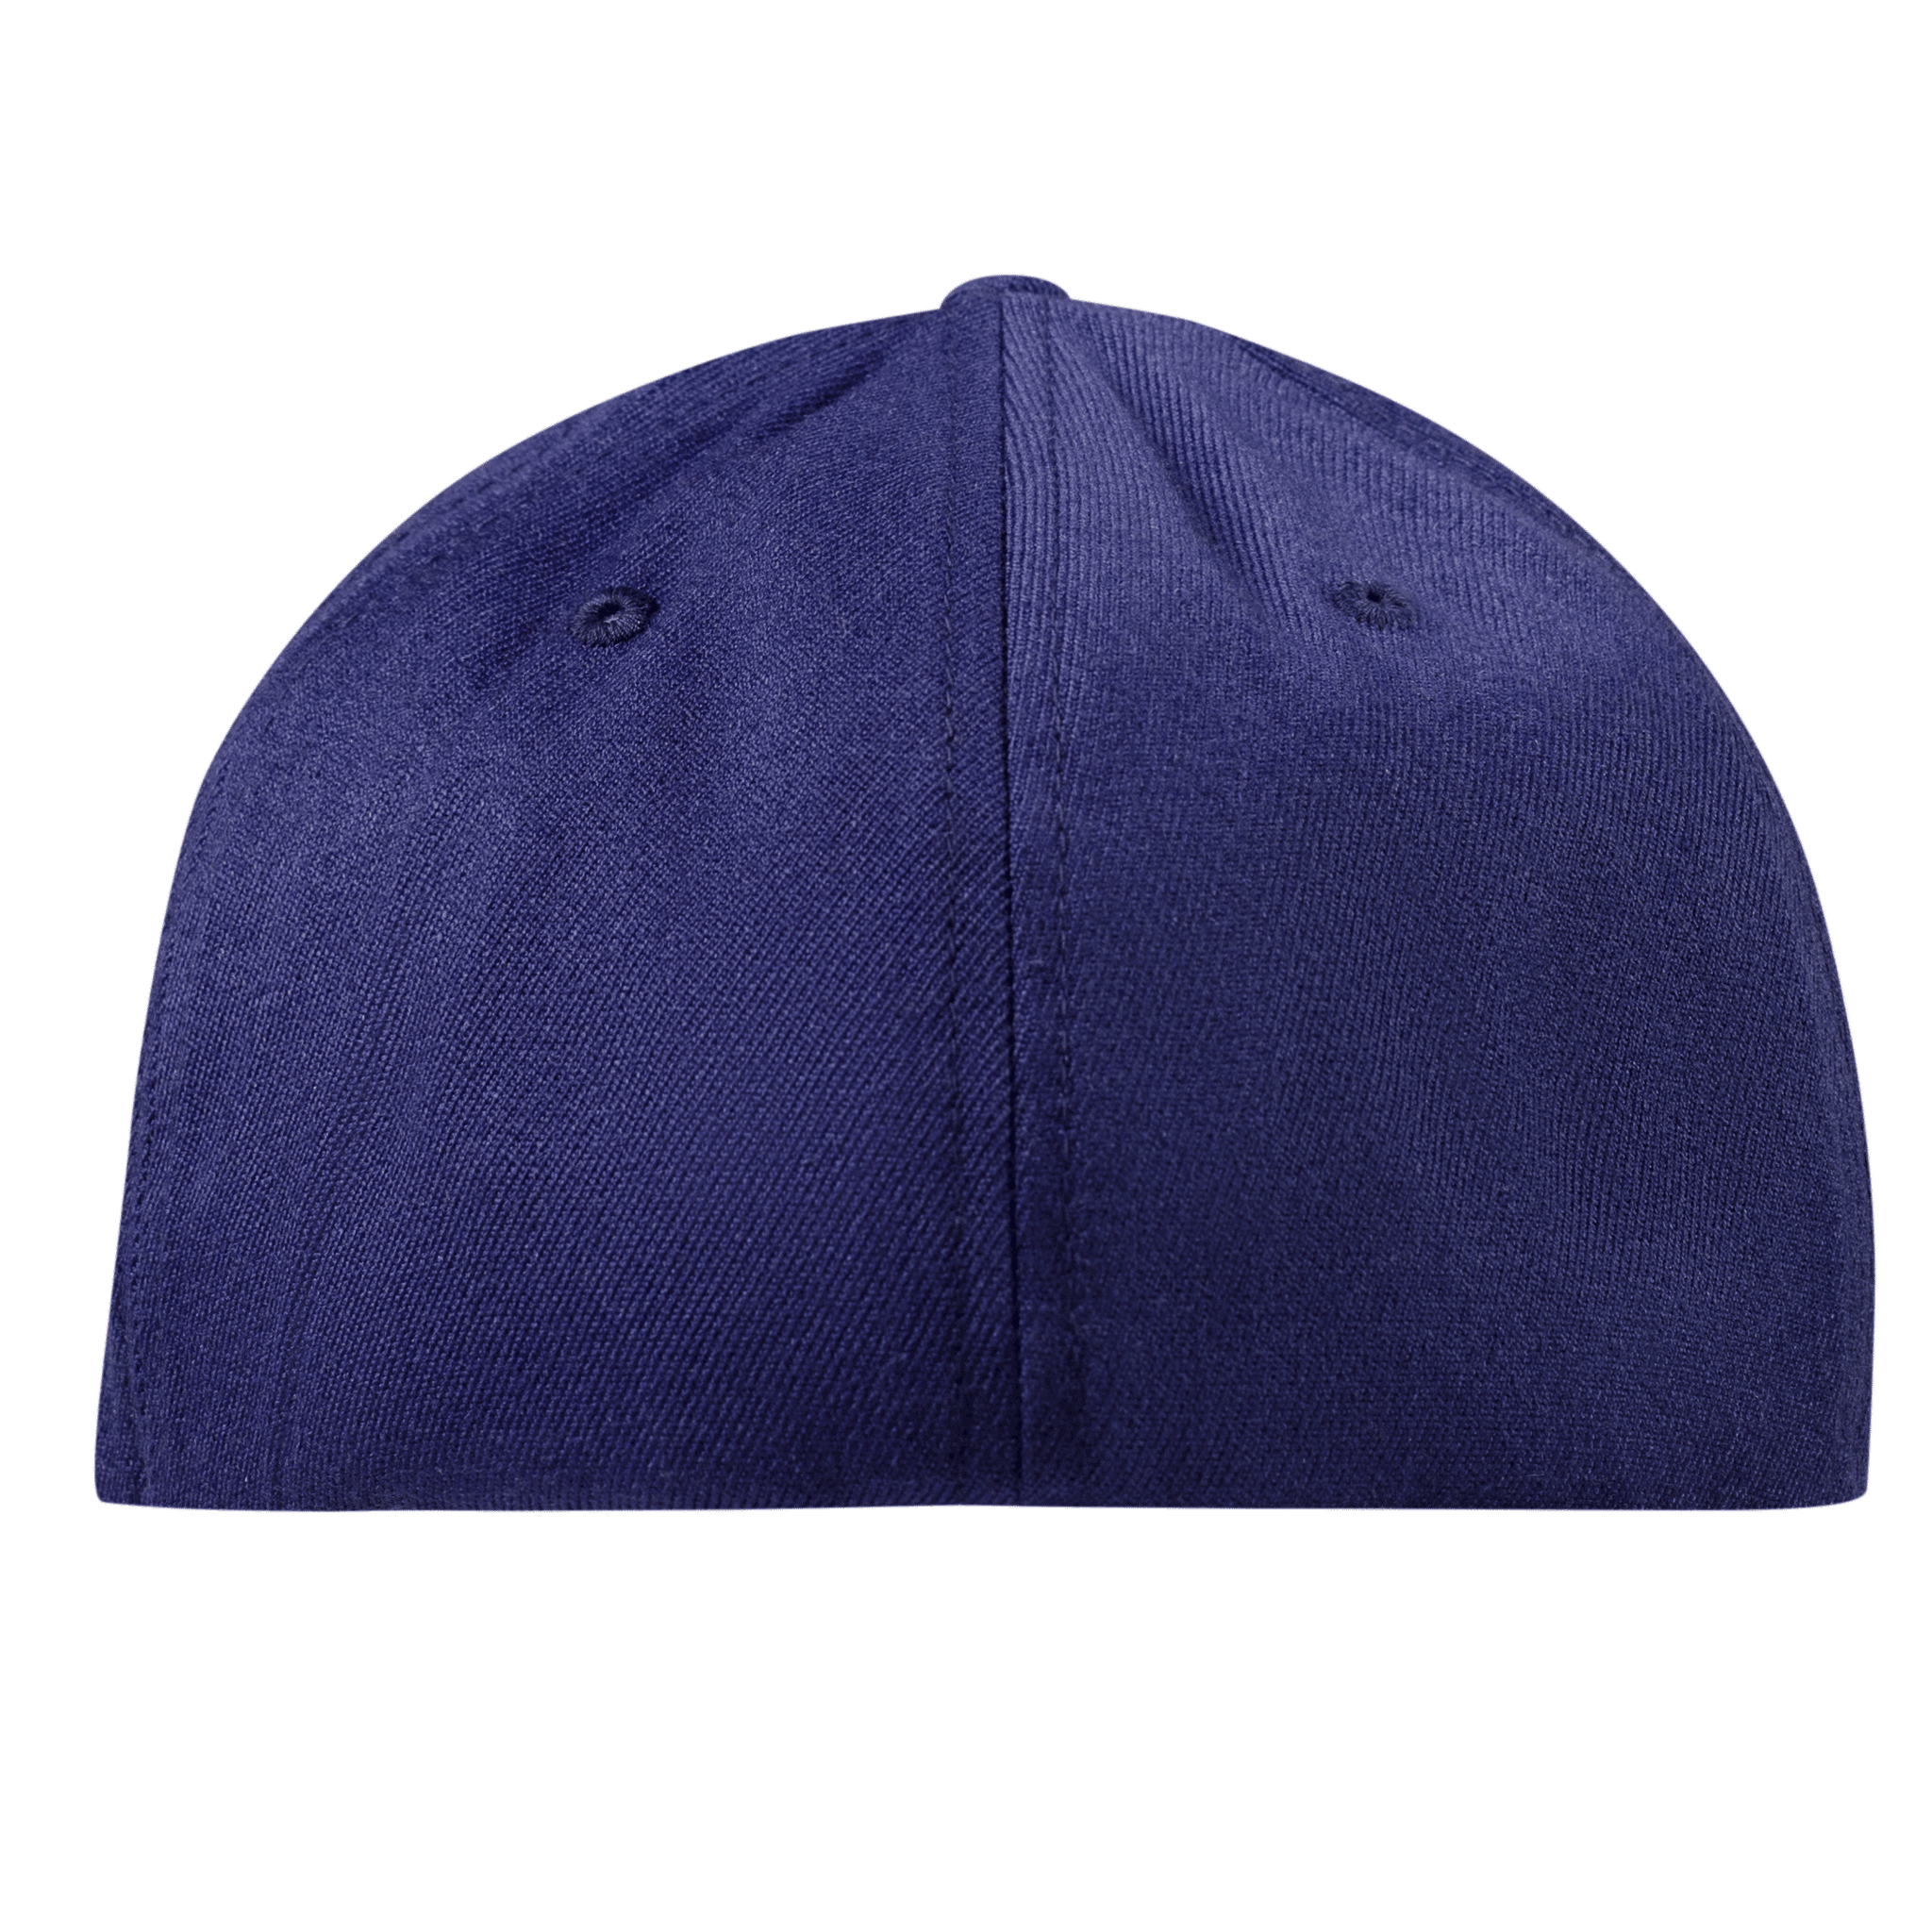 Wyoming Patriot Flexfit Fitted Back Navy